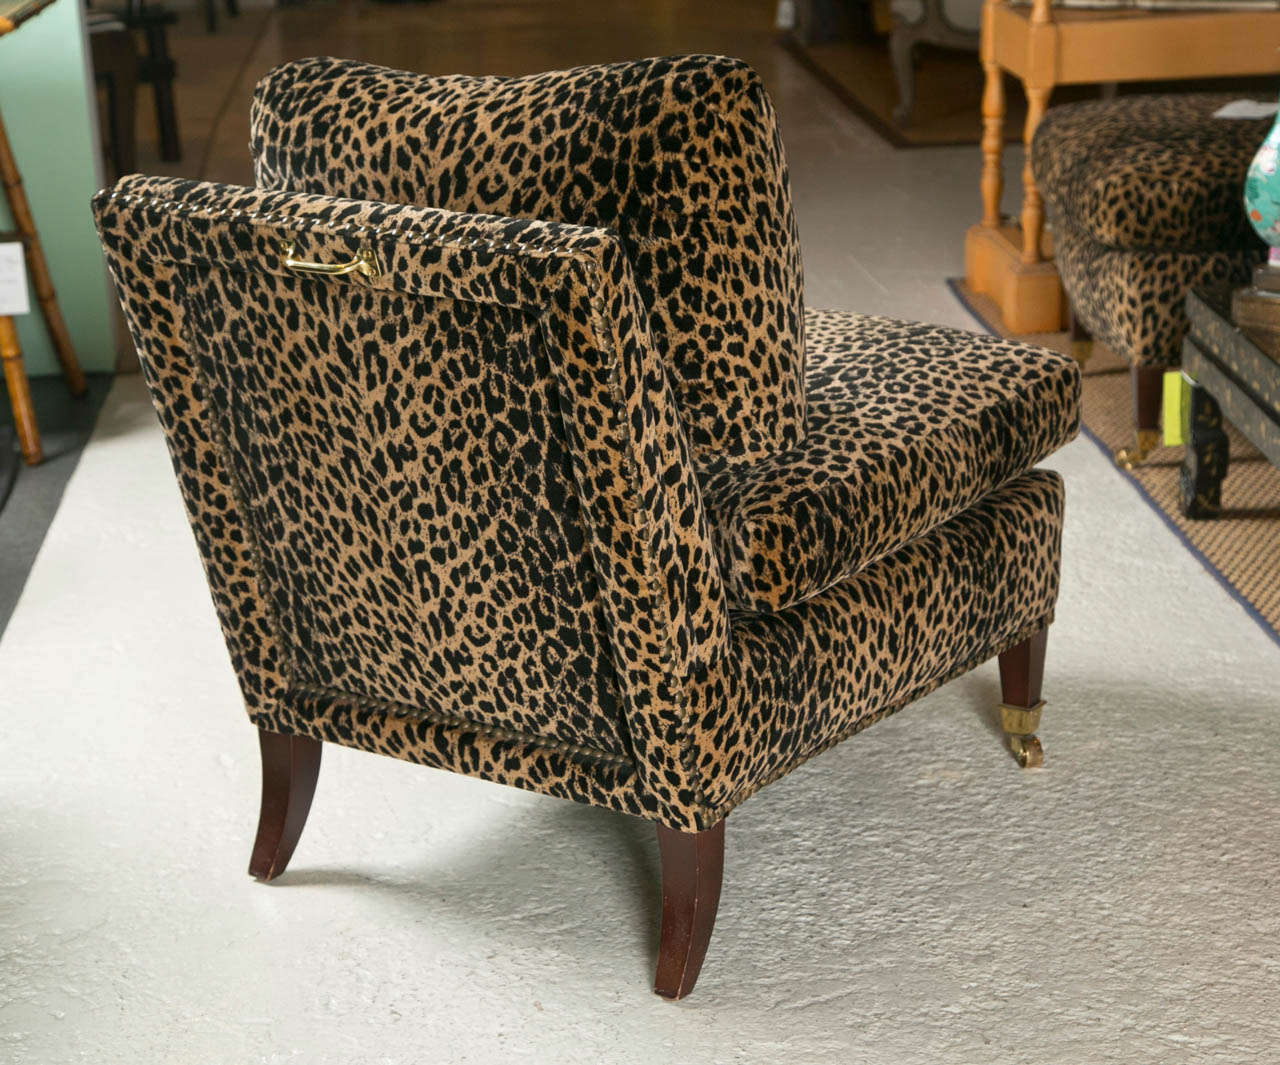 20th Century Mid-Century Lolling Chairs Upholstered in Animal Print Upholstery